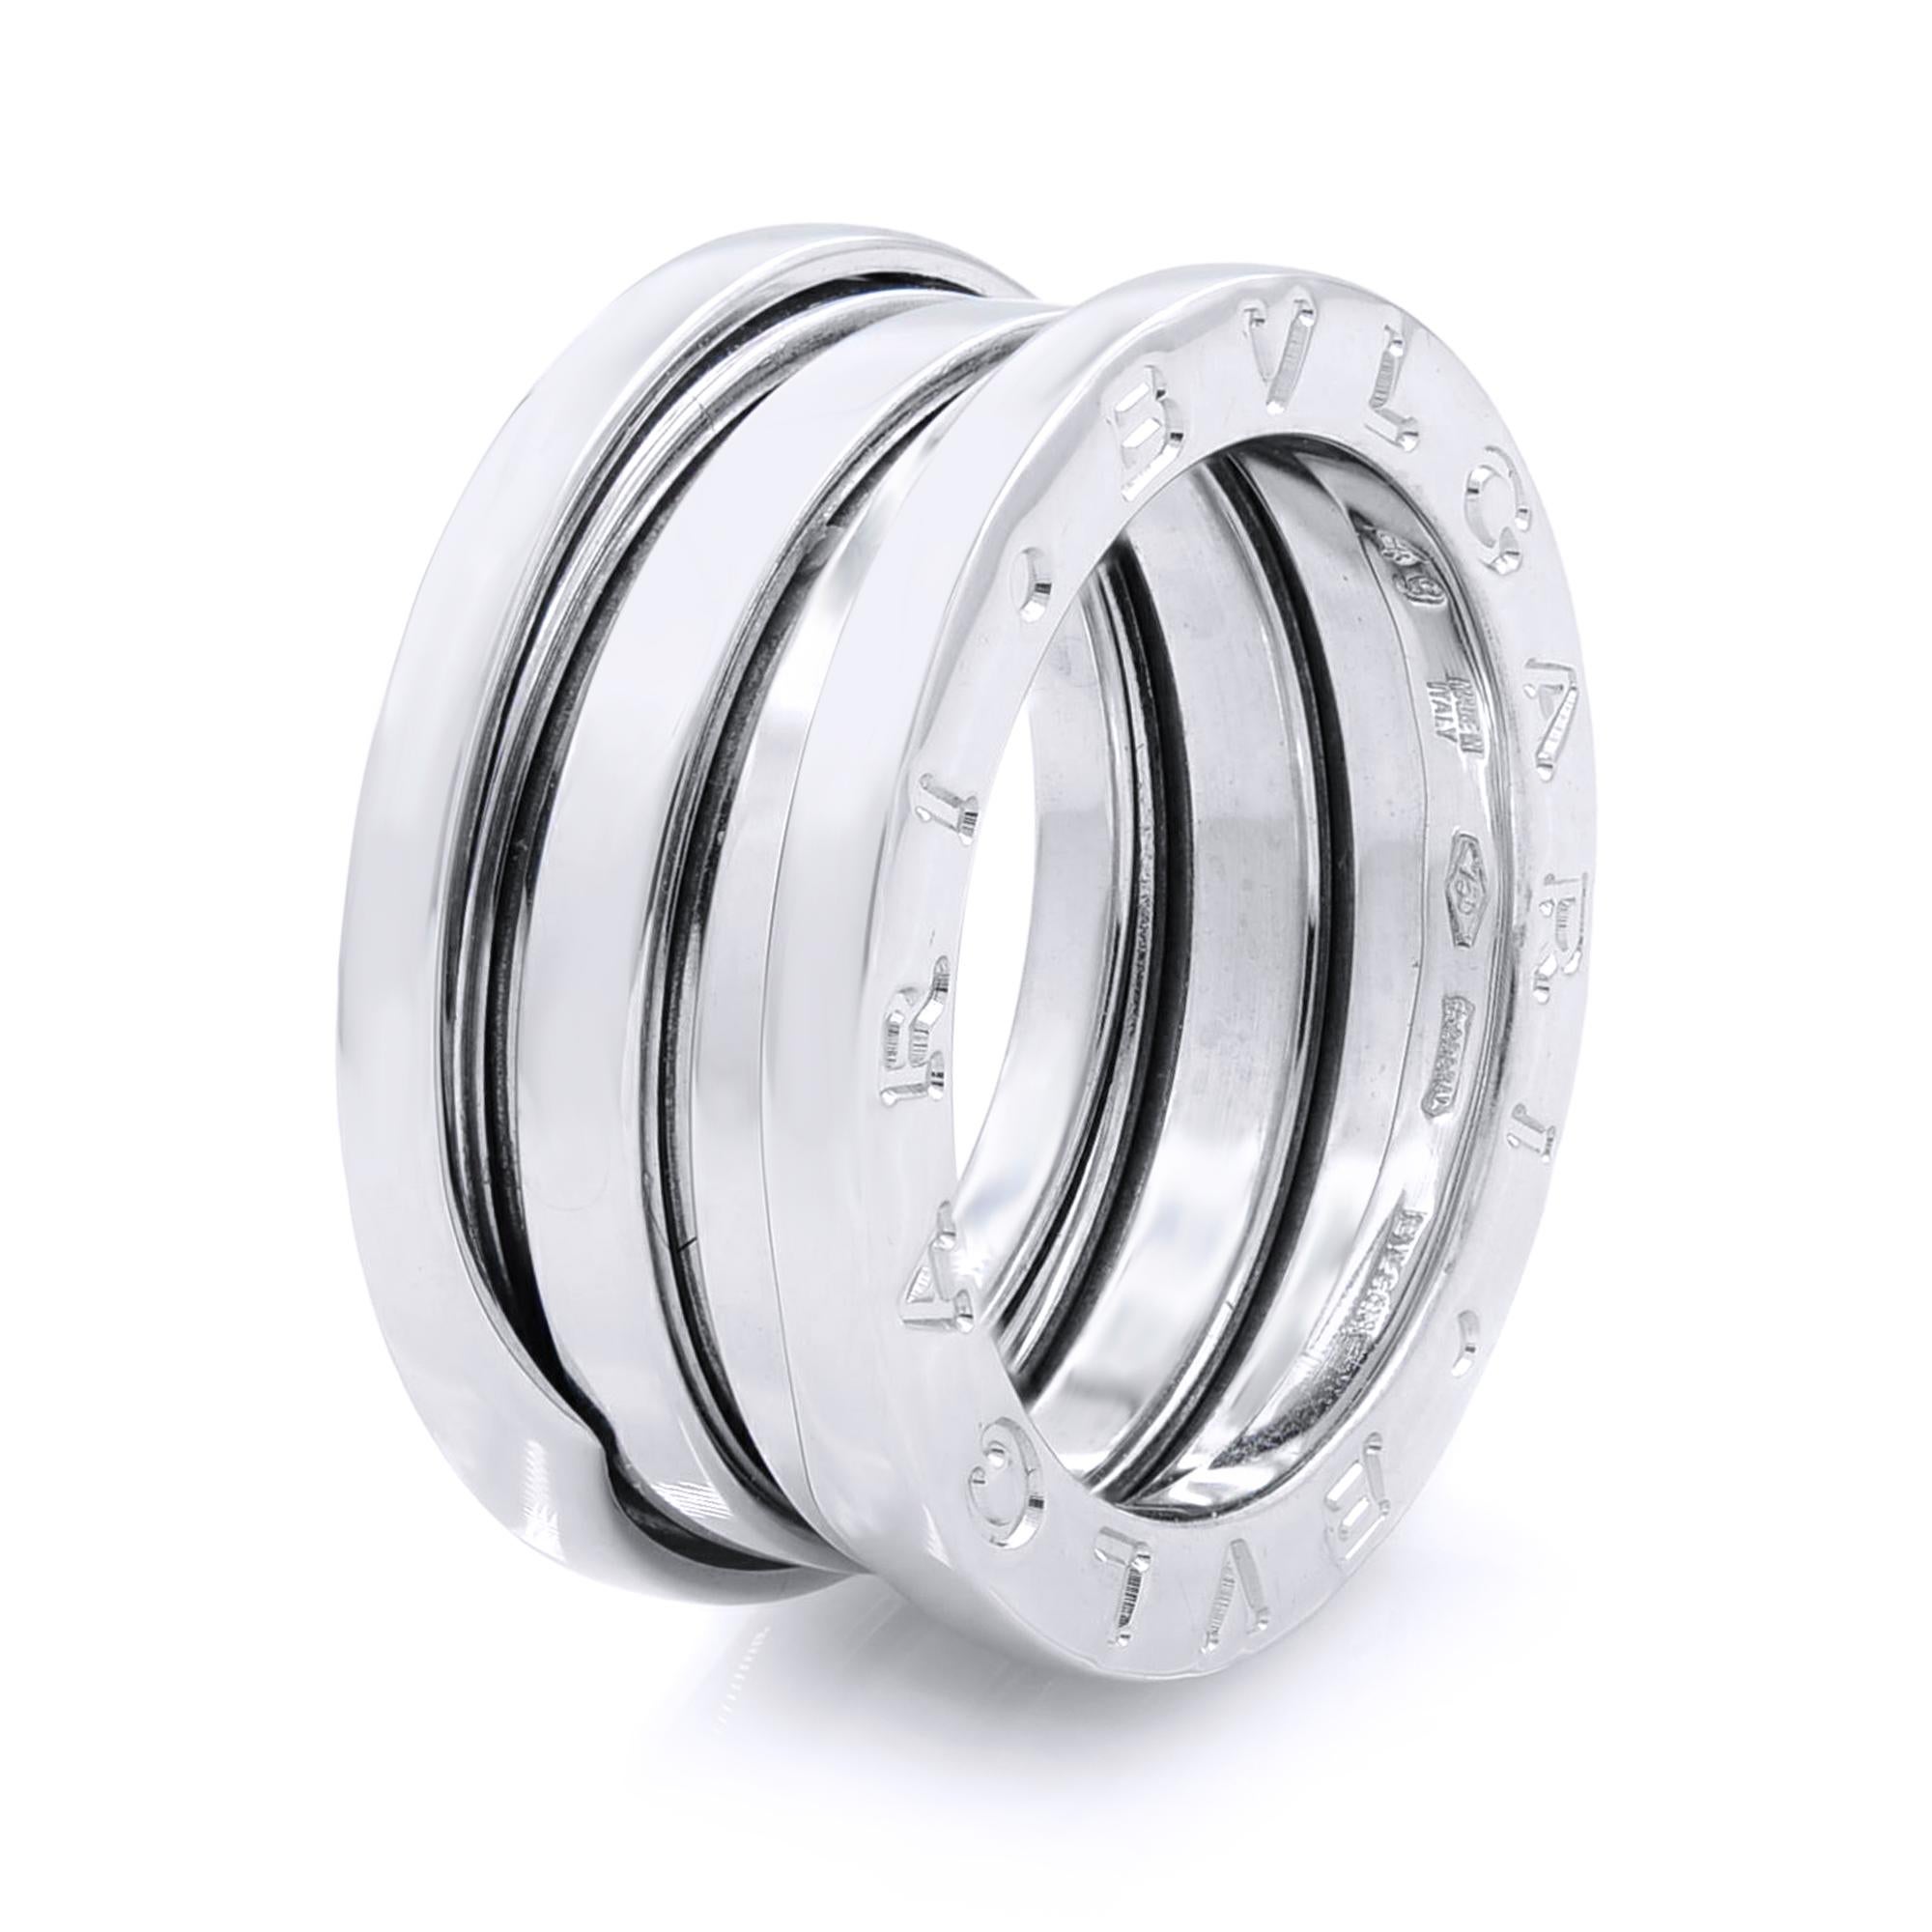 Bvlgari B.Zero 1 18K White Gold Ring SZ 49 US 4.75.

The B.Zero ring is a signature piece from the legendary jewelry design house Bvlgari. It features a clean, modern design with a white gold central band surrounded by two white gold rims with the